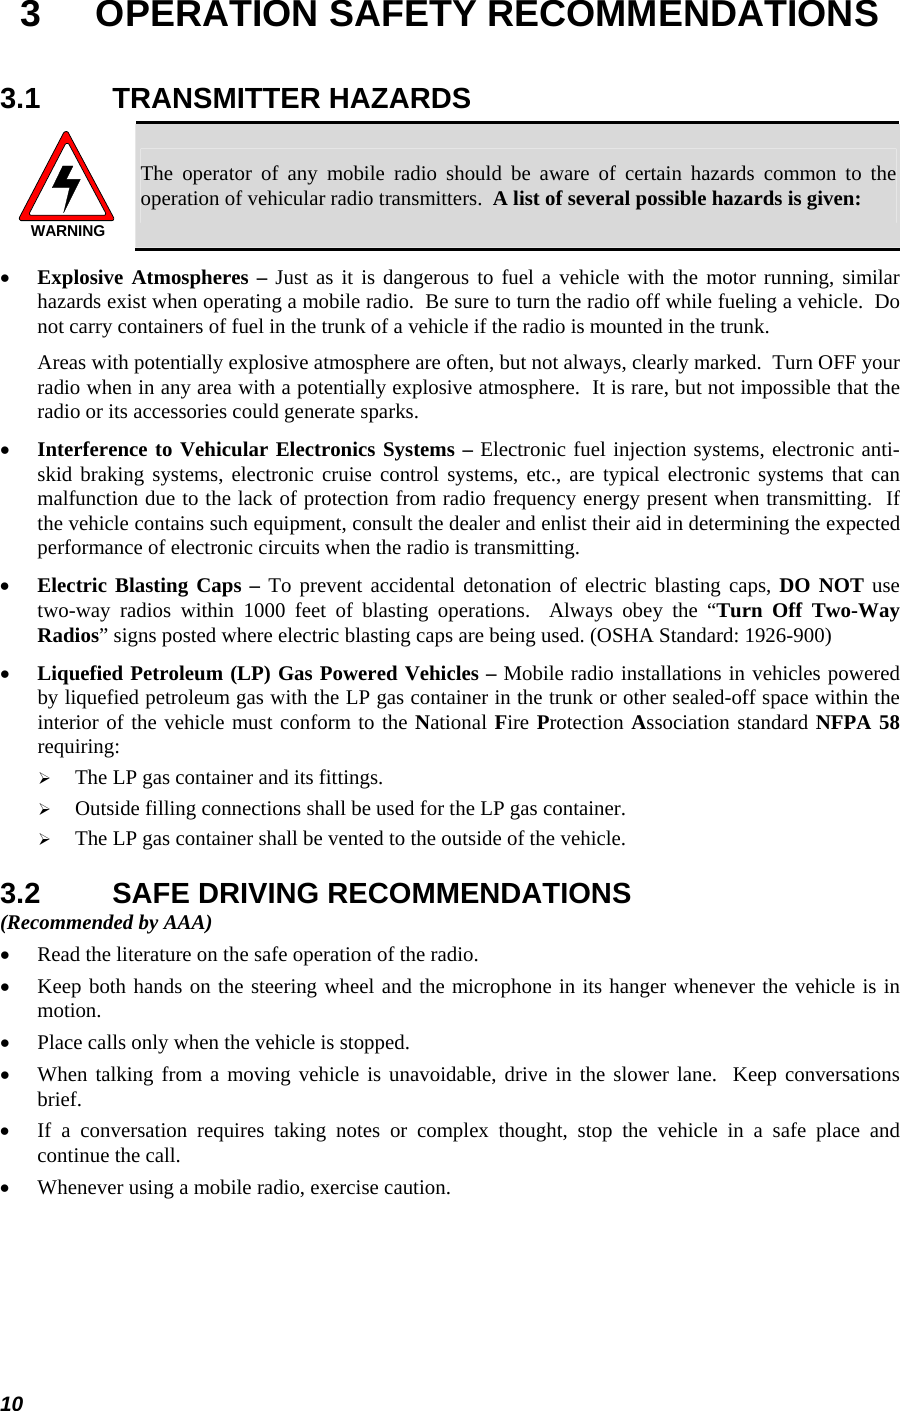  10 3  OPERATION SAFETY RECOMMENDATIONS 3.1 TRANSMITTER HAZARDS WARNING The operator of any mobile radio should be aware of certain hazards common to the operation of vehicular radio transmitters.  A list of several possible hazards is given: • Explosive Atmospheres – Just as it is dangerous to fuel a vehicle with the motor running, similar hazards exist when operating a mobile radio.  Be sure to turn the radio off while fueling a vehicle.  Do not carry containers of fuel in the trunk of a vehicle if the radio is mounted in the trunk. Areas with potentially explosive atmosphere are often, but not always, clearly marked.  Turn OFF your radio when in any area with a potentially explosive atmosphere.  It is rare, but not impossible that the radio or its accessories could generate sparks. • Interference to Vehicular Electronics Systems – Electronic fuel injection systems, electronic anti-skid braking systems, electronic cruise control systems, etc., are typical electronic systems that can malfunction due to the lack of protection from radio frequency energy present when transmitting.  If the vehicle contains such equipment, consult the dealer and enlist their aid in determining the expected performance of electronic circuits when the radio is transmitting. • Electric Blasting Caps – To prevent accidental detonation of electric blasting caps, DO NOT use two-way radios within 1000 feet of blasting operations.  Always obey the “Turn Off Two-Way Radios” signs posted where electric blasting caps are being used. (OSHA Standard: 1926-900) • Liquefied Petroleum (LP) Gas Powered Vehicles – Mobile radio installations in vehicles powered by liquefied petroleum gas with the LP gas container in the trunk or other sealed-off space within the interior of the vehicle must conform to the National Fire Protection Association standard NFPA 58 requiring: ¾ The LP gas container and its fittings. ¾ Outside filling connections shall be used for the LP gas container. ¾ The LP gas container shall be vented to the outside of the vehicle. 3.2  SAFE DRIVING RECOMMENDATIONS (Recommended by AAA) • Read the literature on the safe operation of the radio. • Keep both hands on the steering wheel and the microphone in its hanger whenever the vehicle is in motion. • Place calls only when the vehicle is stopped. • When talking from a moving vehicle is unavoidable, drive in the slower lane.  Keep conversations brief. • If a conversation requires taking notes or complex thought, stop the vehicle in a safe place and continue the call. • Whenever using a mobile radio, exercise caution. 